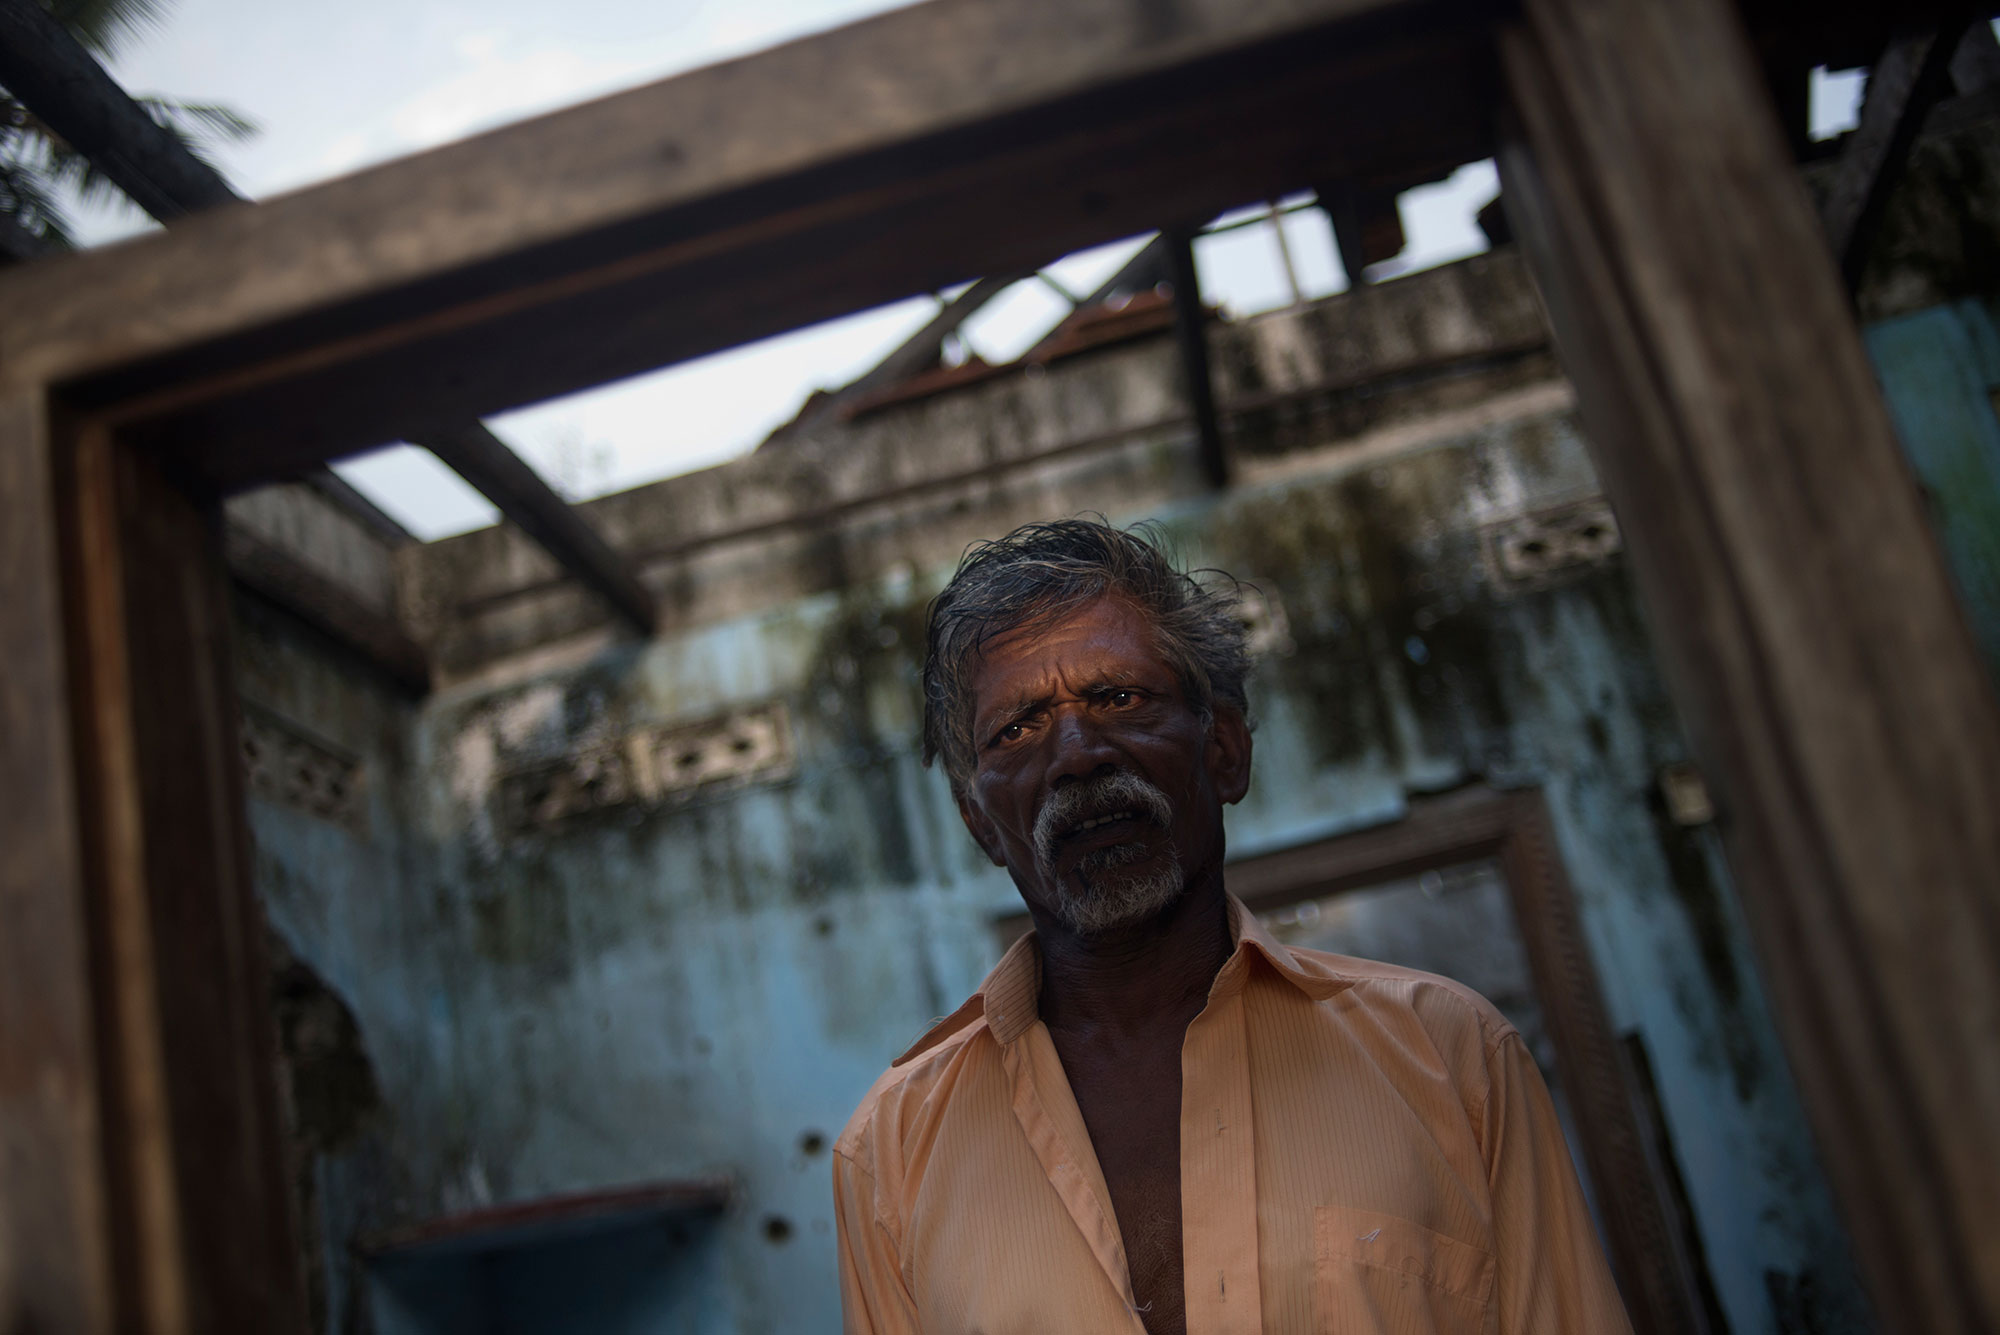 Anthony Fernando, a Tamil civilian, stands at the entrance of his house in the Mullaitivu district, which was badly damaged during the fighting. His wife and daughter were killed during the war. 